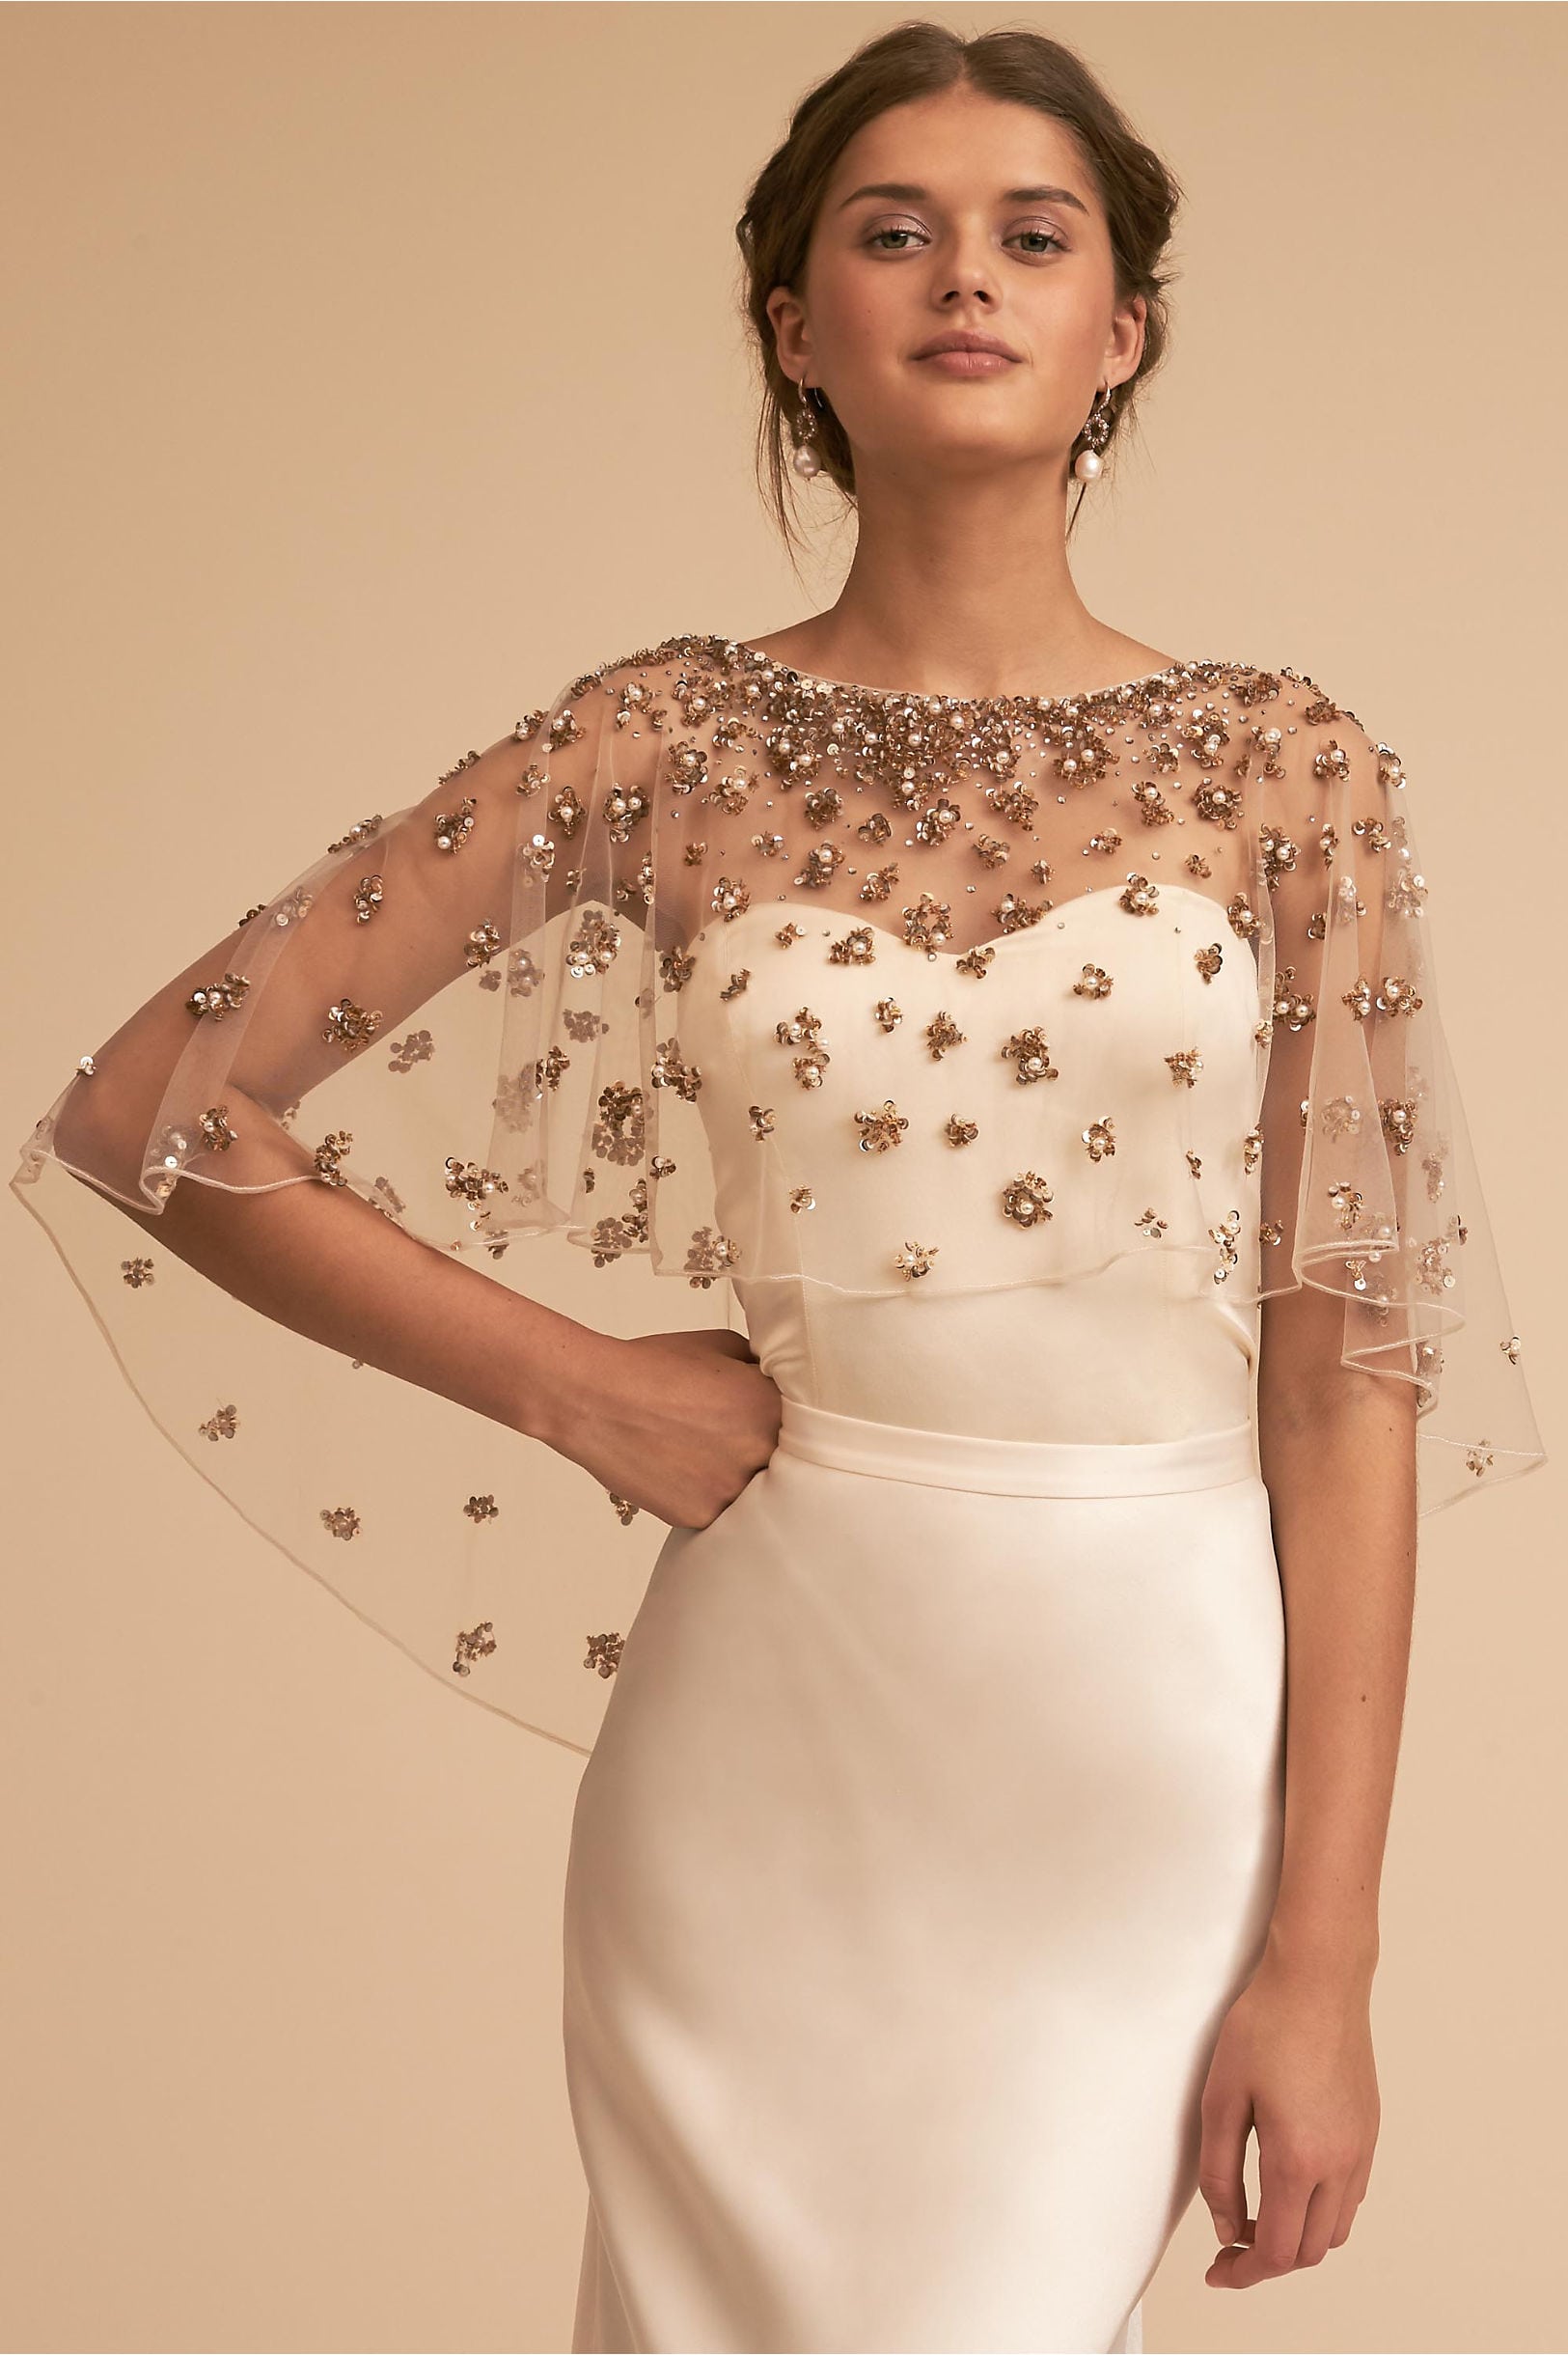 Palmer Cape from BHLDN: translucent sheer cape with metallic flower appliqués